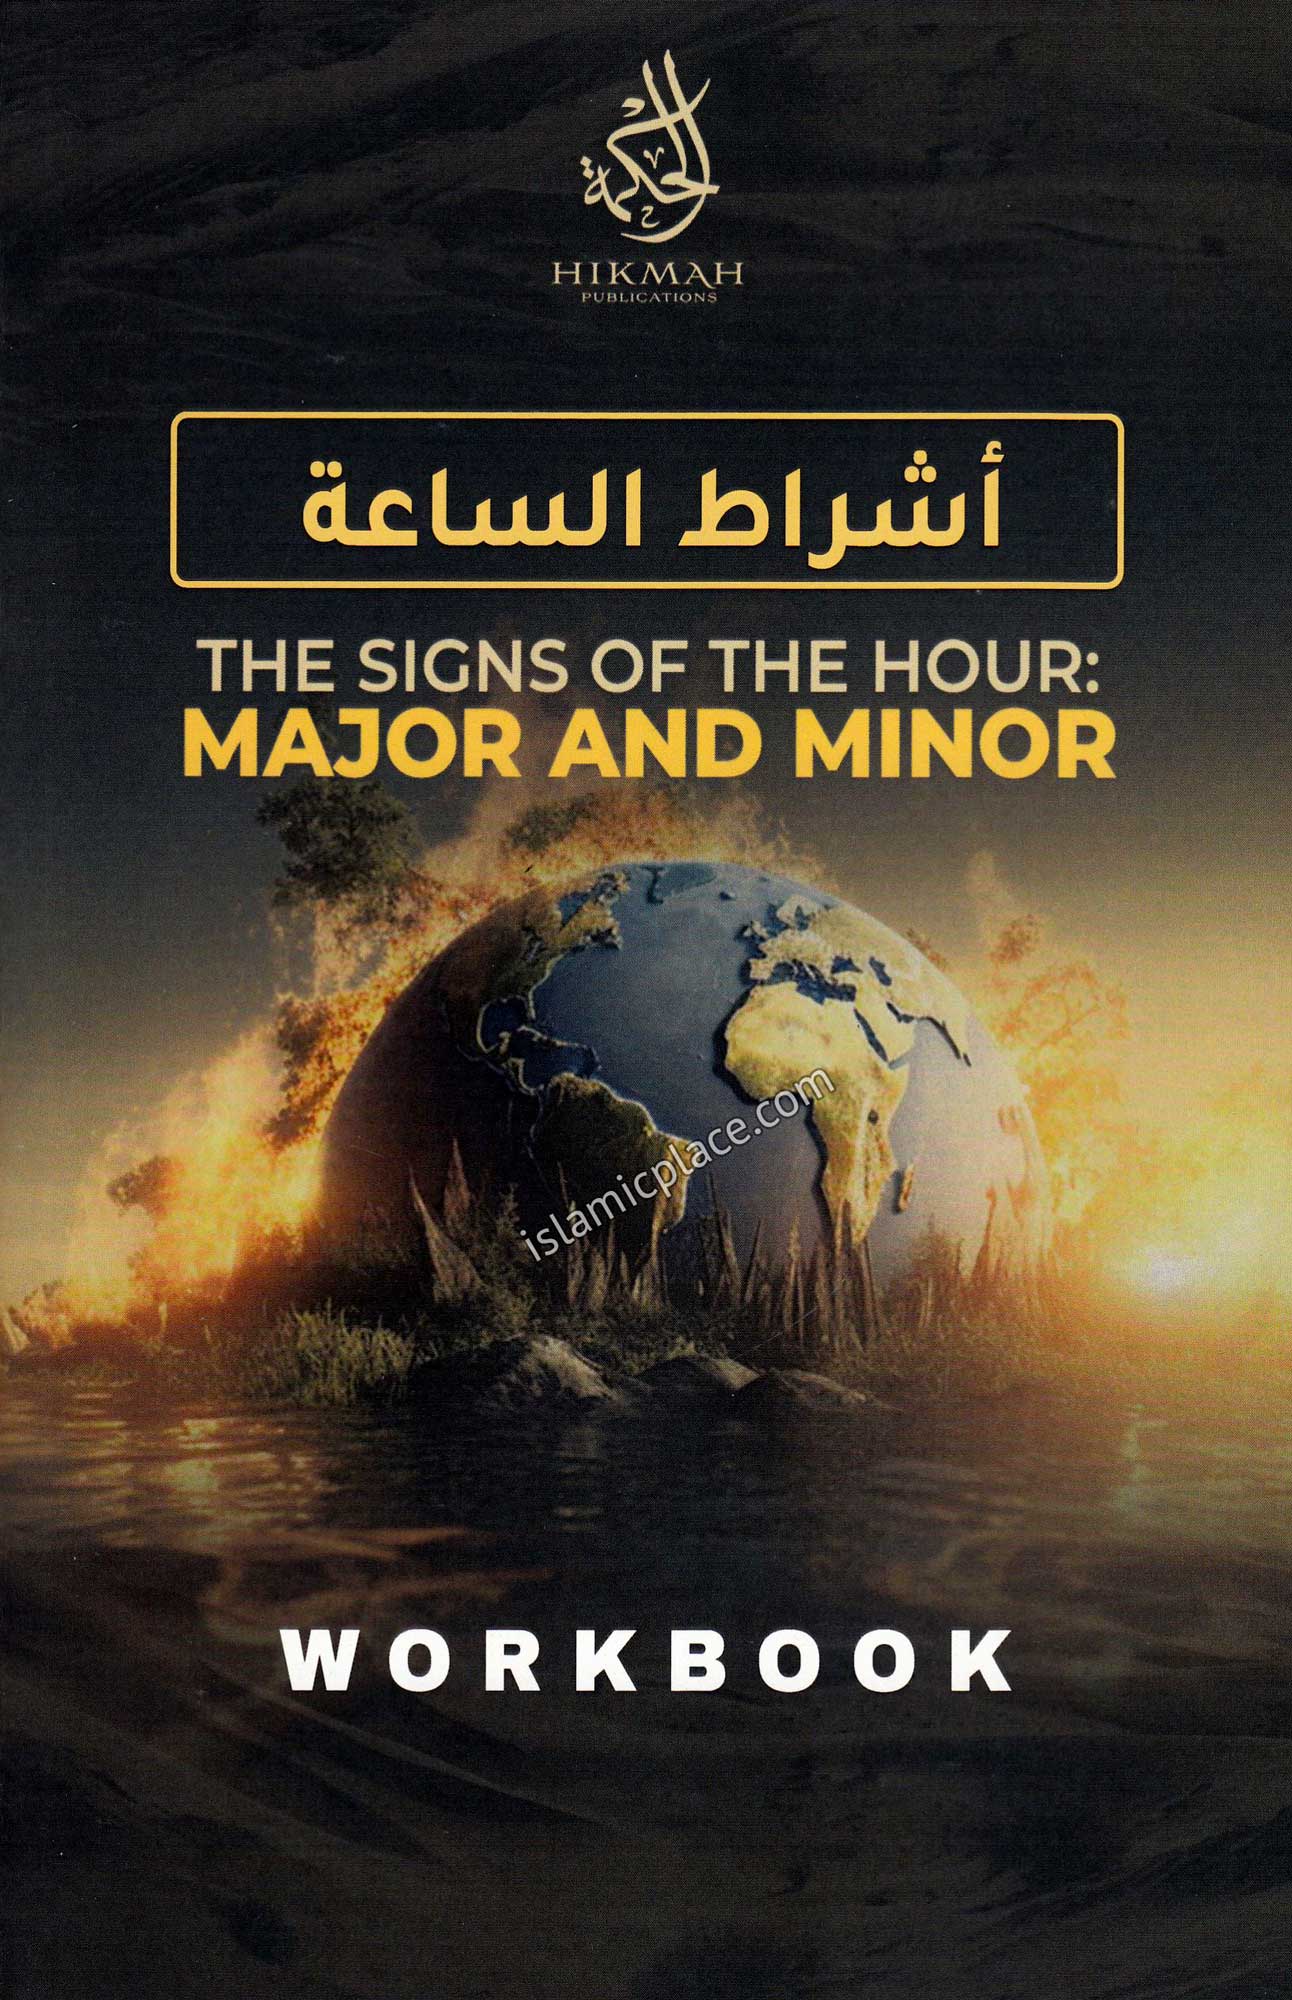 The Signs of the Hour: Major and Minor - Workbook